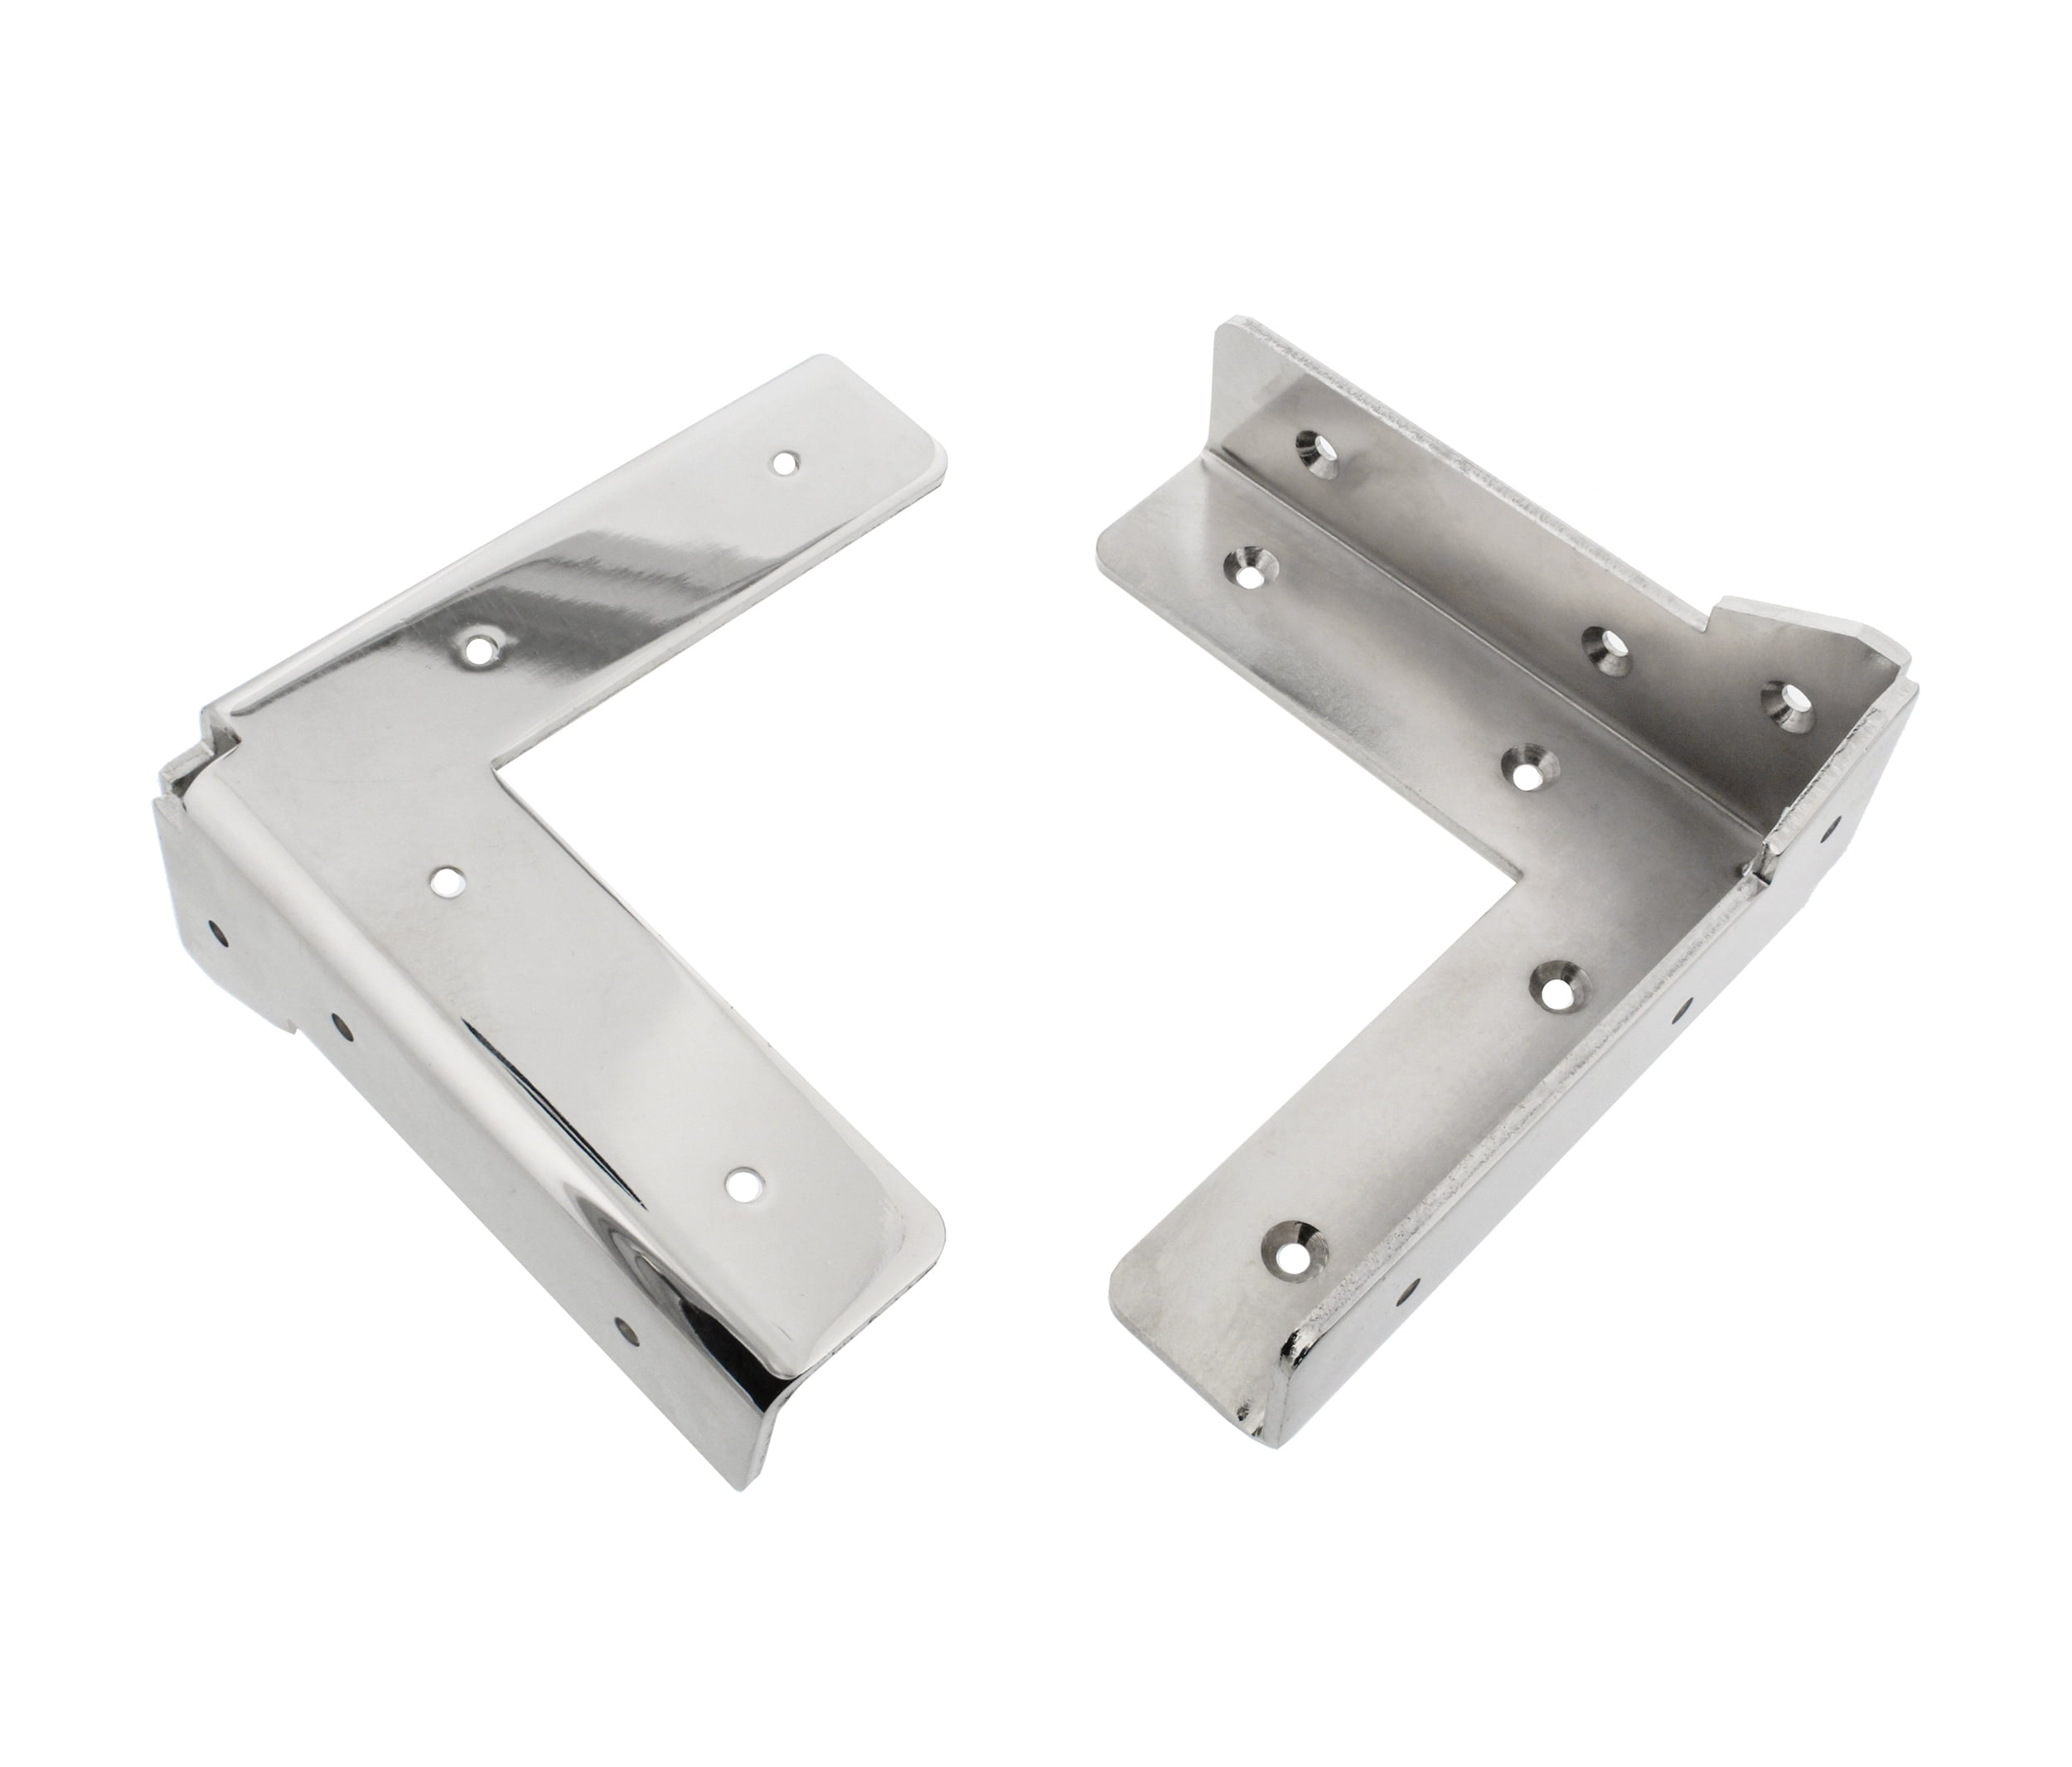 90 Degree Corner Clamps (Set of 2 Clamps) at Penn State Industries